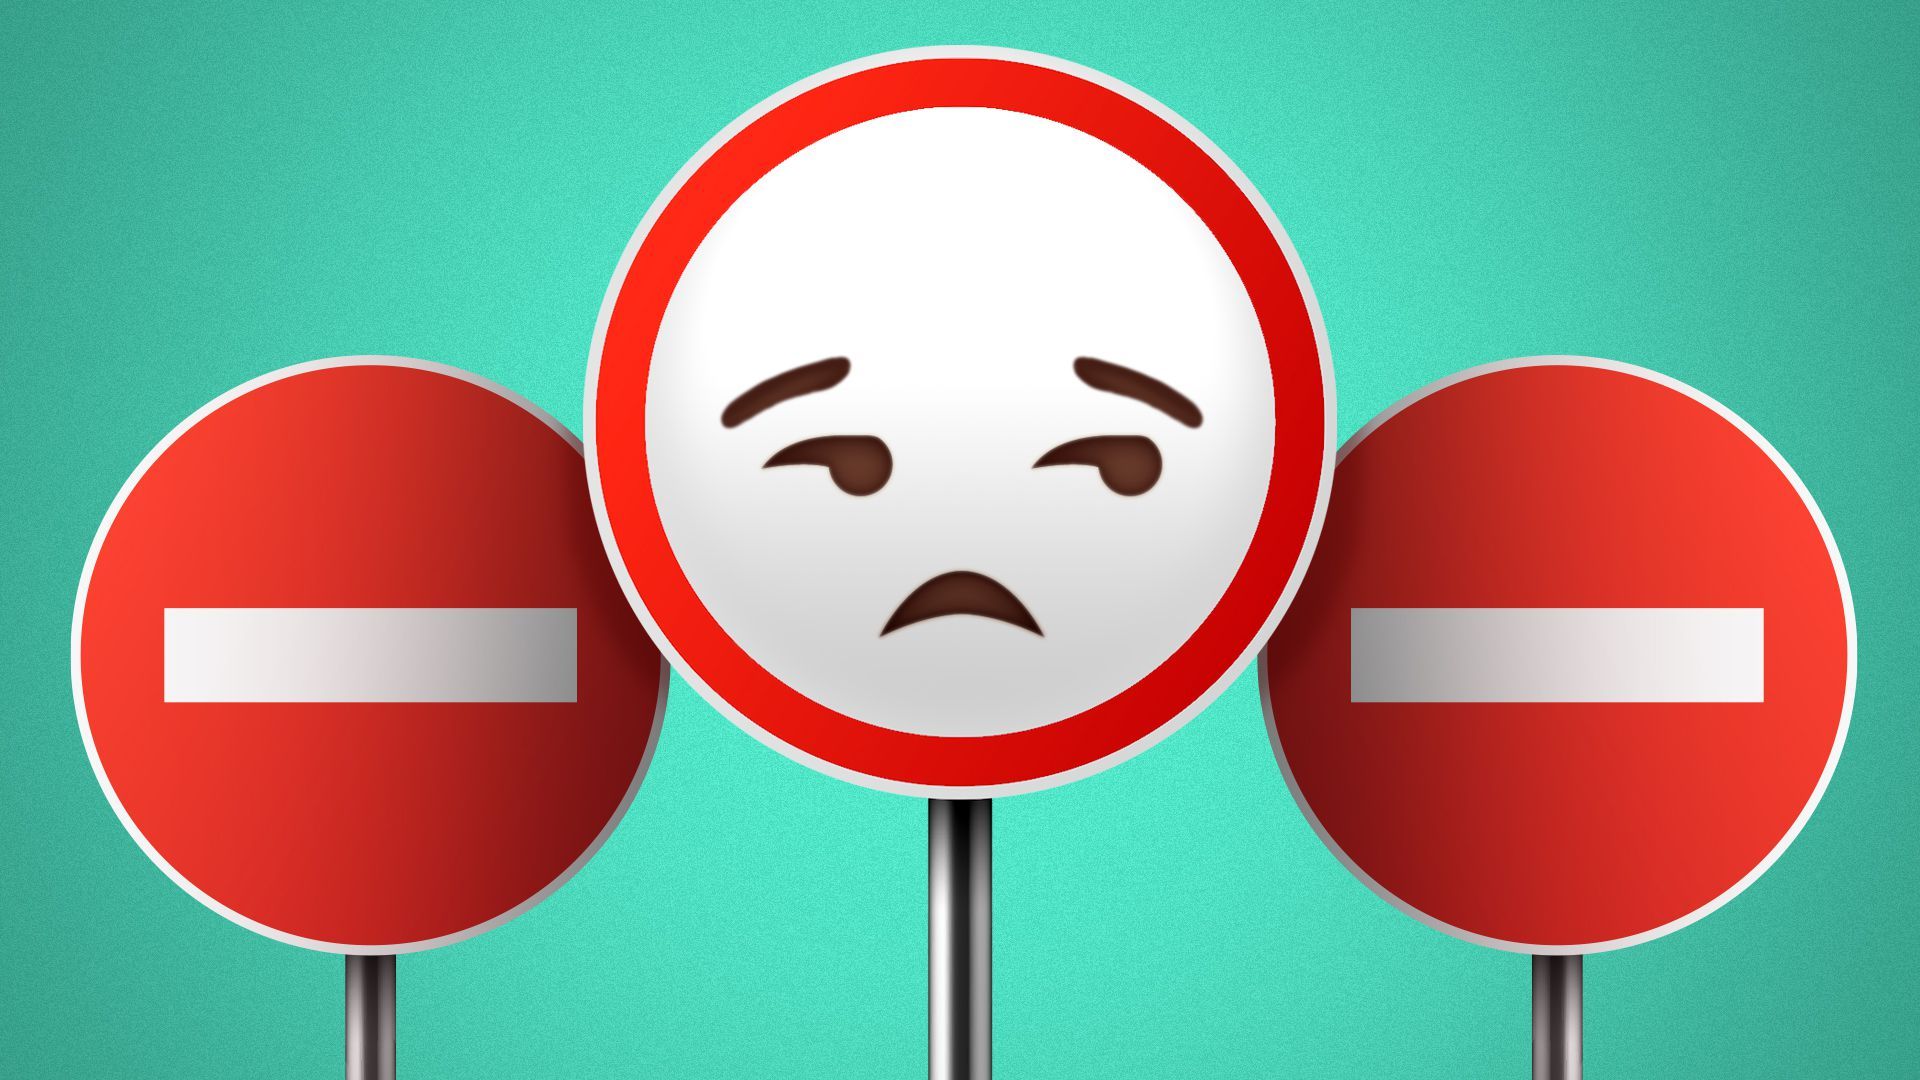 Illustration of three road signs; one has a bored expression.